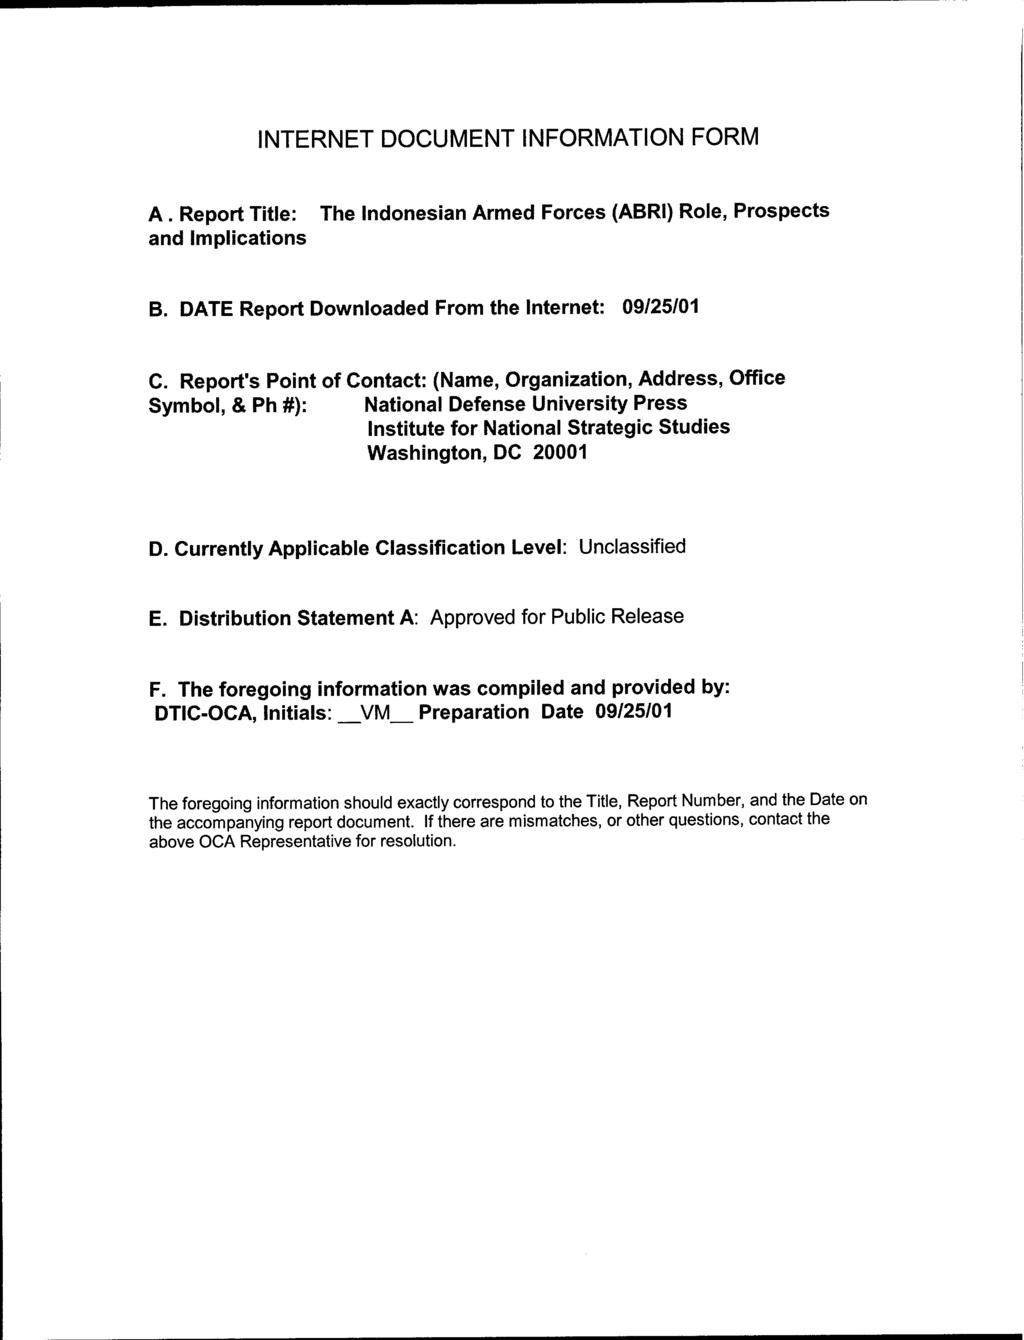 INTERNET DOCUMENT INFORMATION FORM A. Report Title: The Indonesian Armed Forces (ABRI) Role, Prospects and Implications B. DATE Report Downloaded From the Internet: 09/25/01 C.